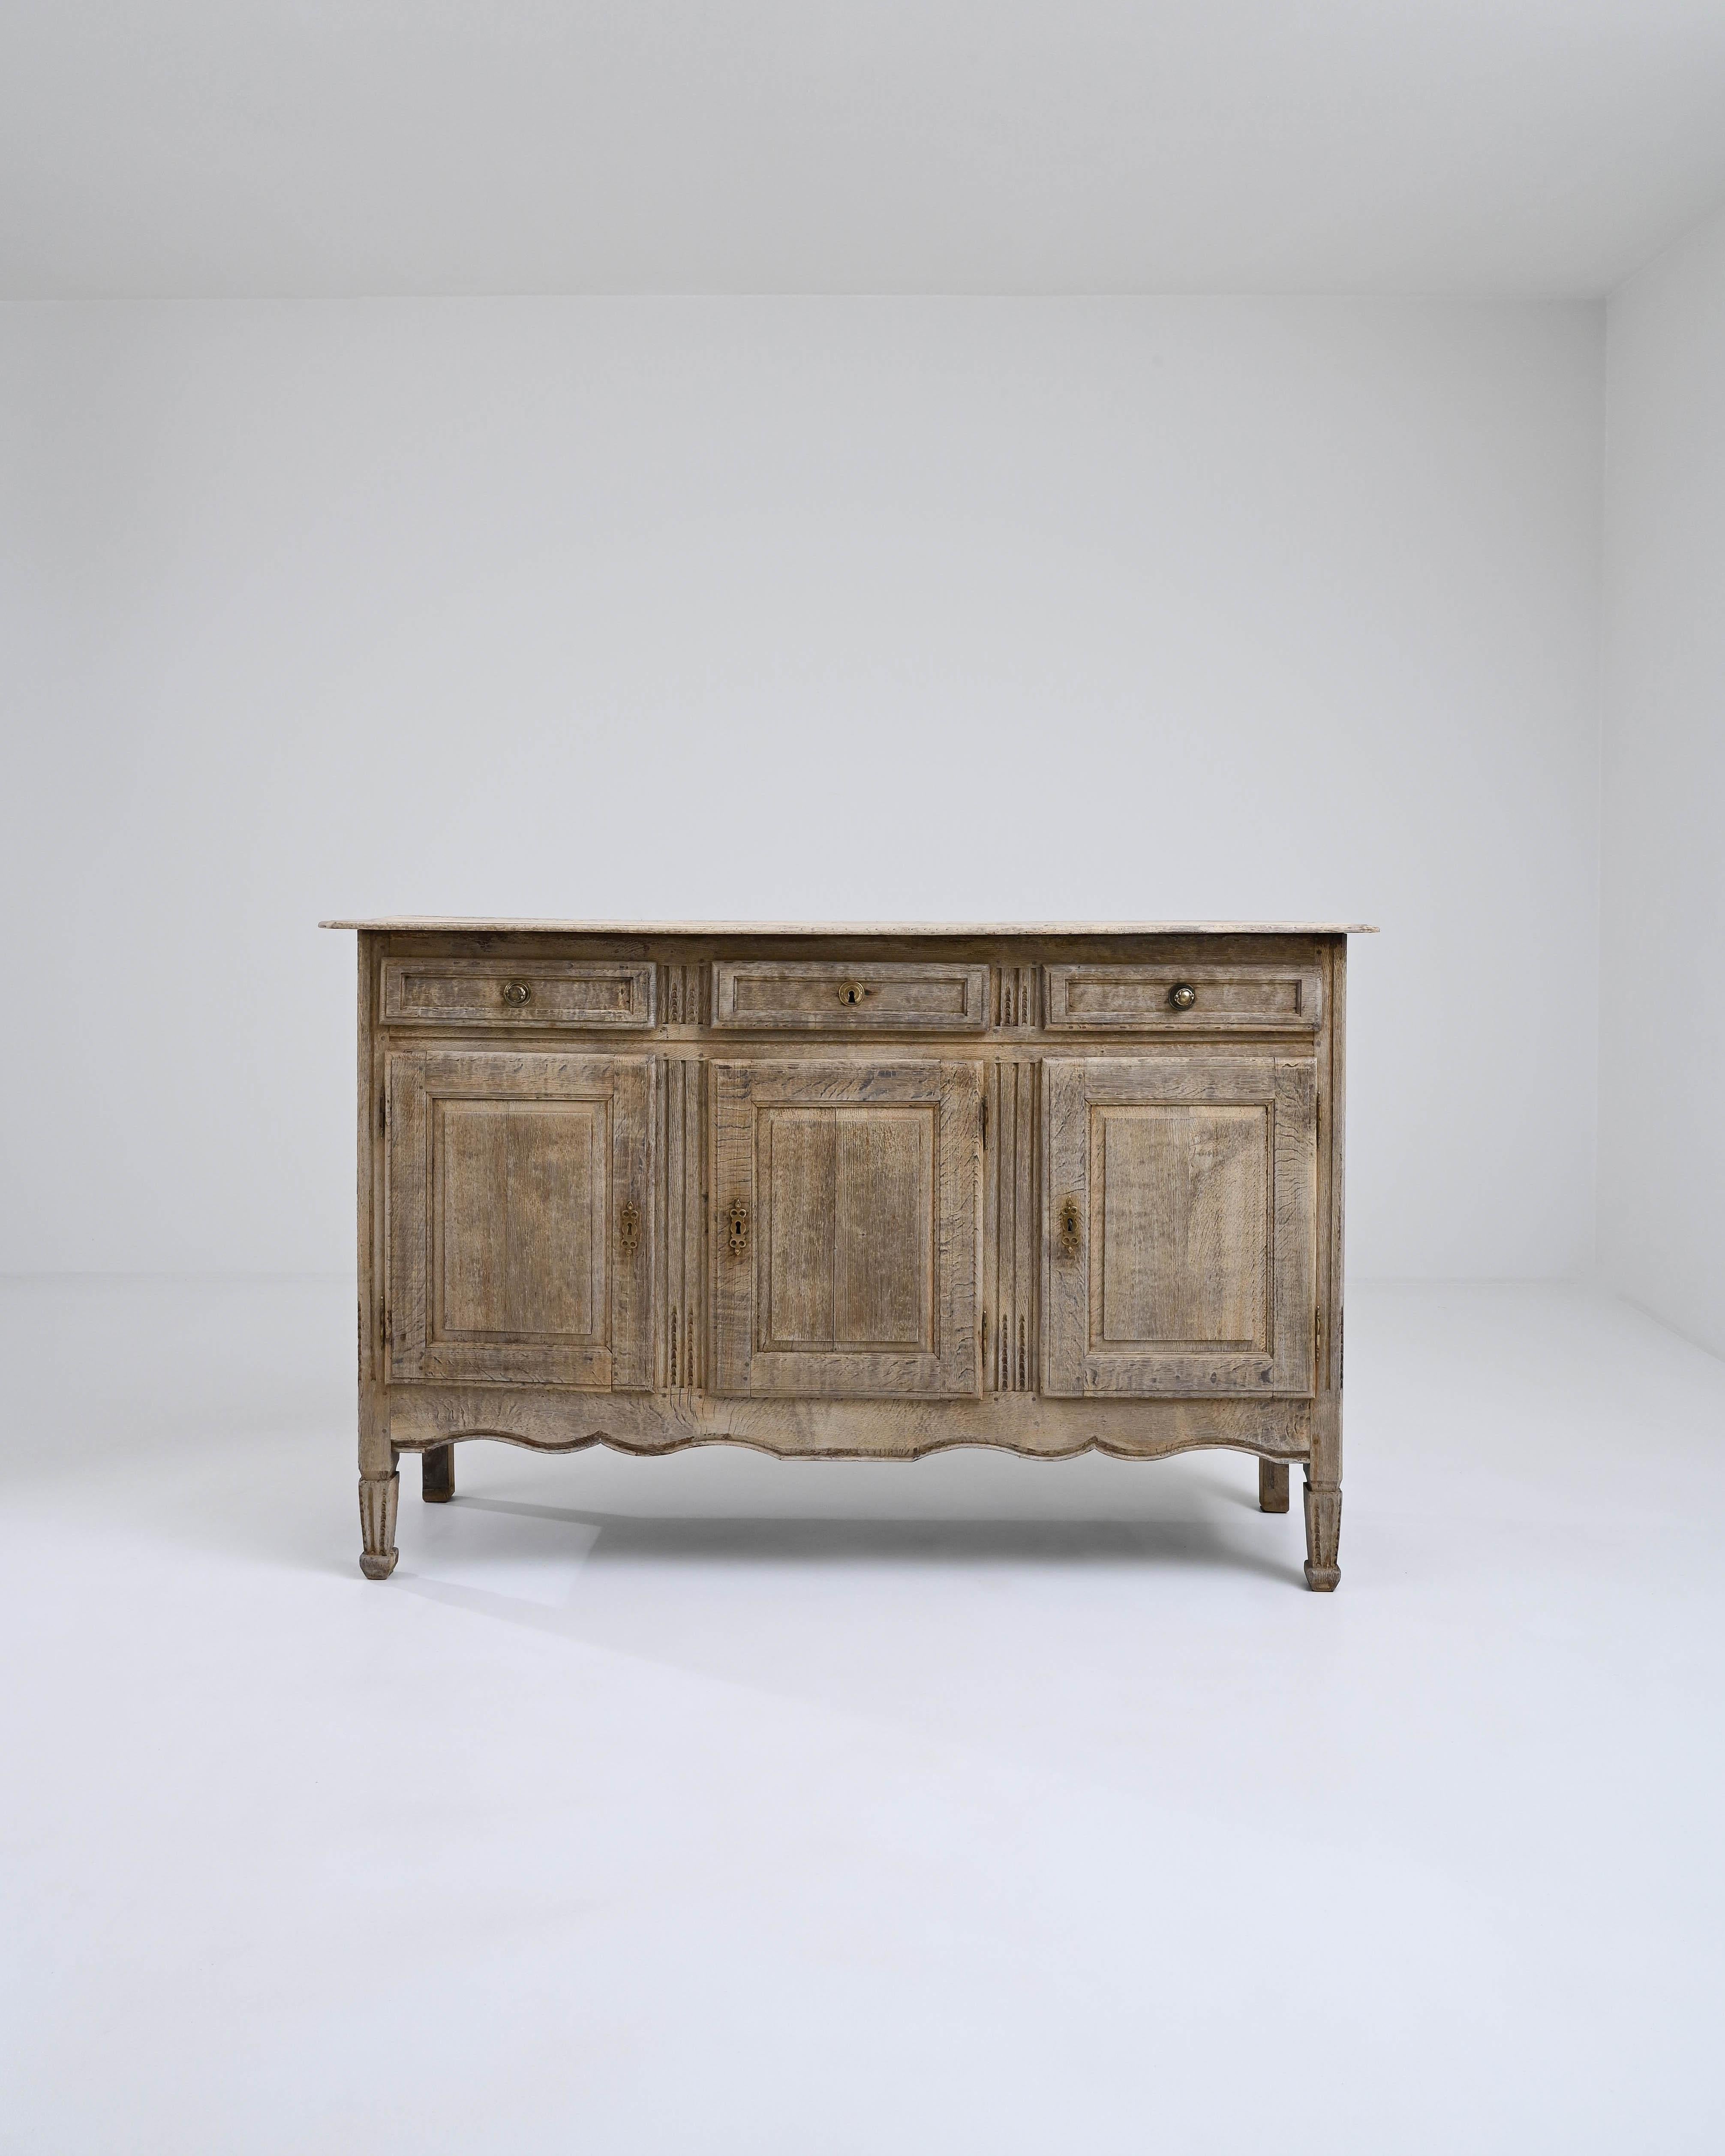 A wooden buffet made in early 19th century France. This French buffet presents a picture of high craft and delicately imparted details. Gestures such as the notched feet, brass keyholes, and tapering carved aprons cast a spell of special charm. A